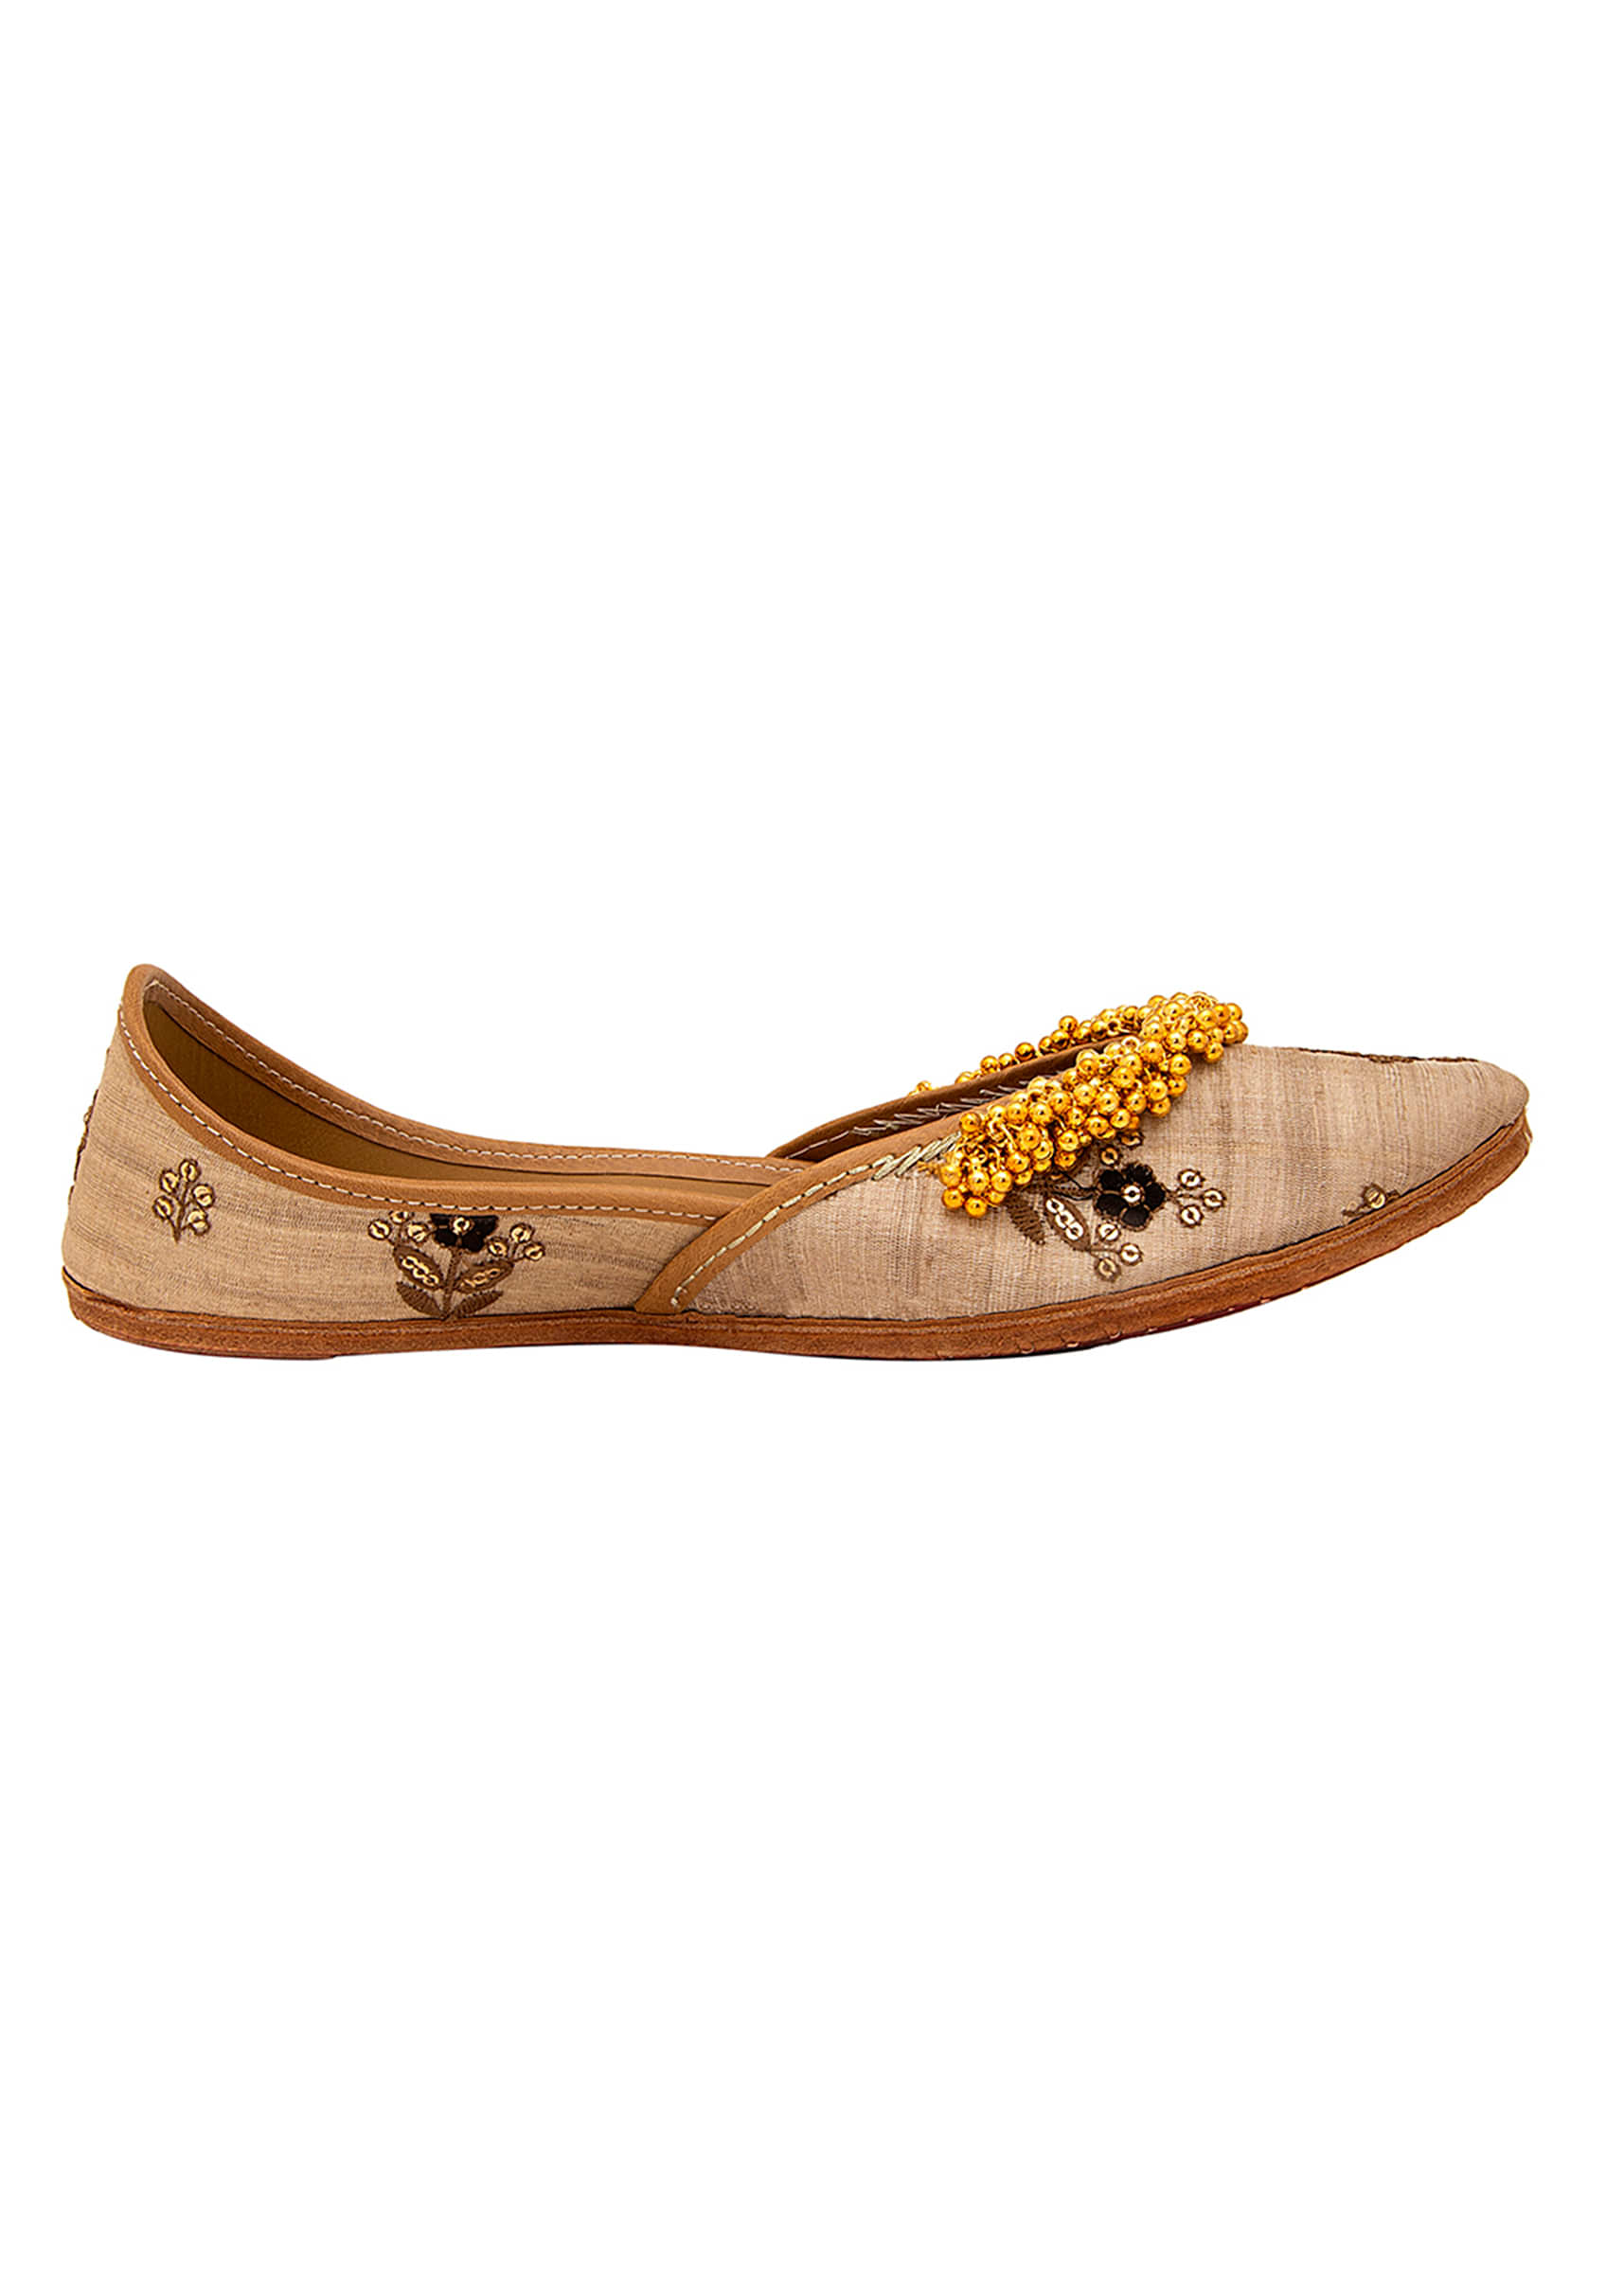 Beige Floral Print Juttis With Ghungroos And Leather Underlining